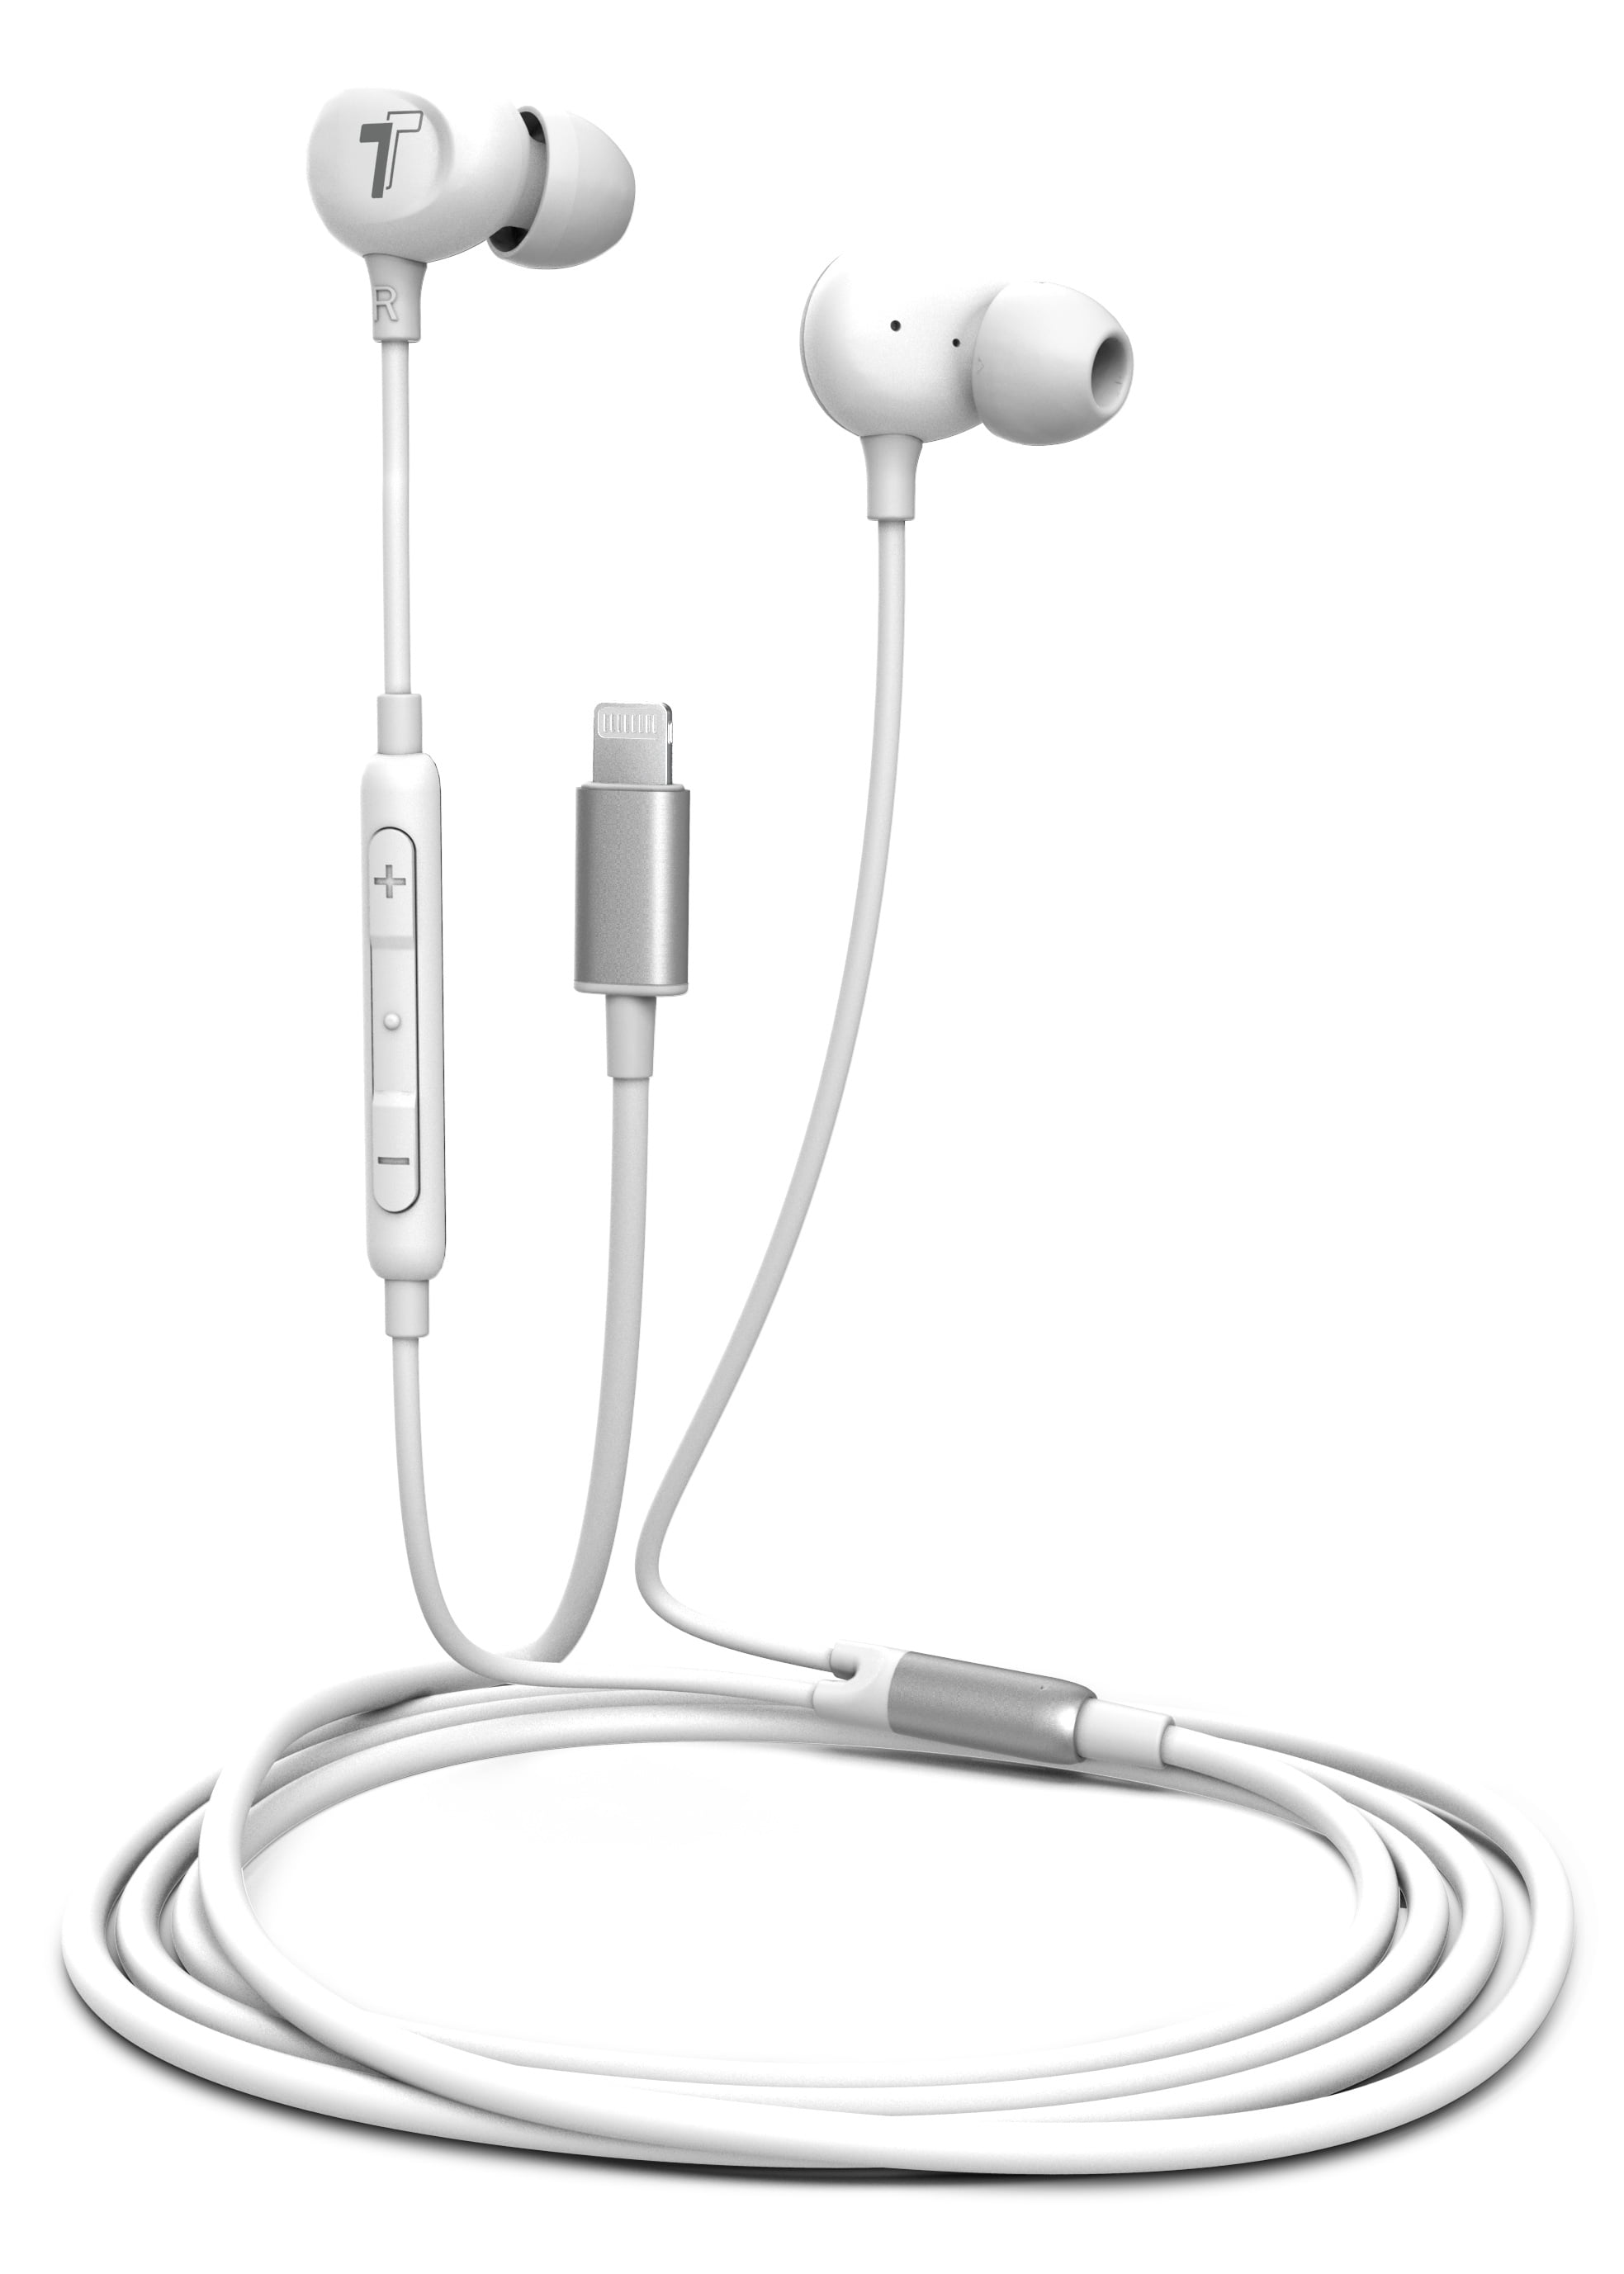 Compatible with Apple iPhone 13/12 Pro/11/Xs/Xs Max/XR/X/8/7 Plus Plug and Play Headphones Wired Earphone in-Ear Earbuds Noise Reduction with Microphone 